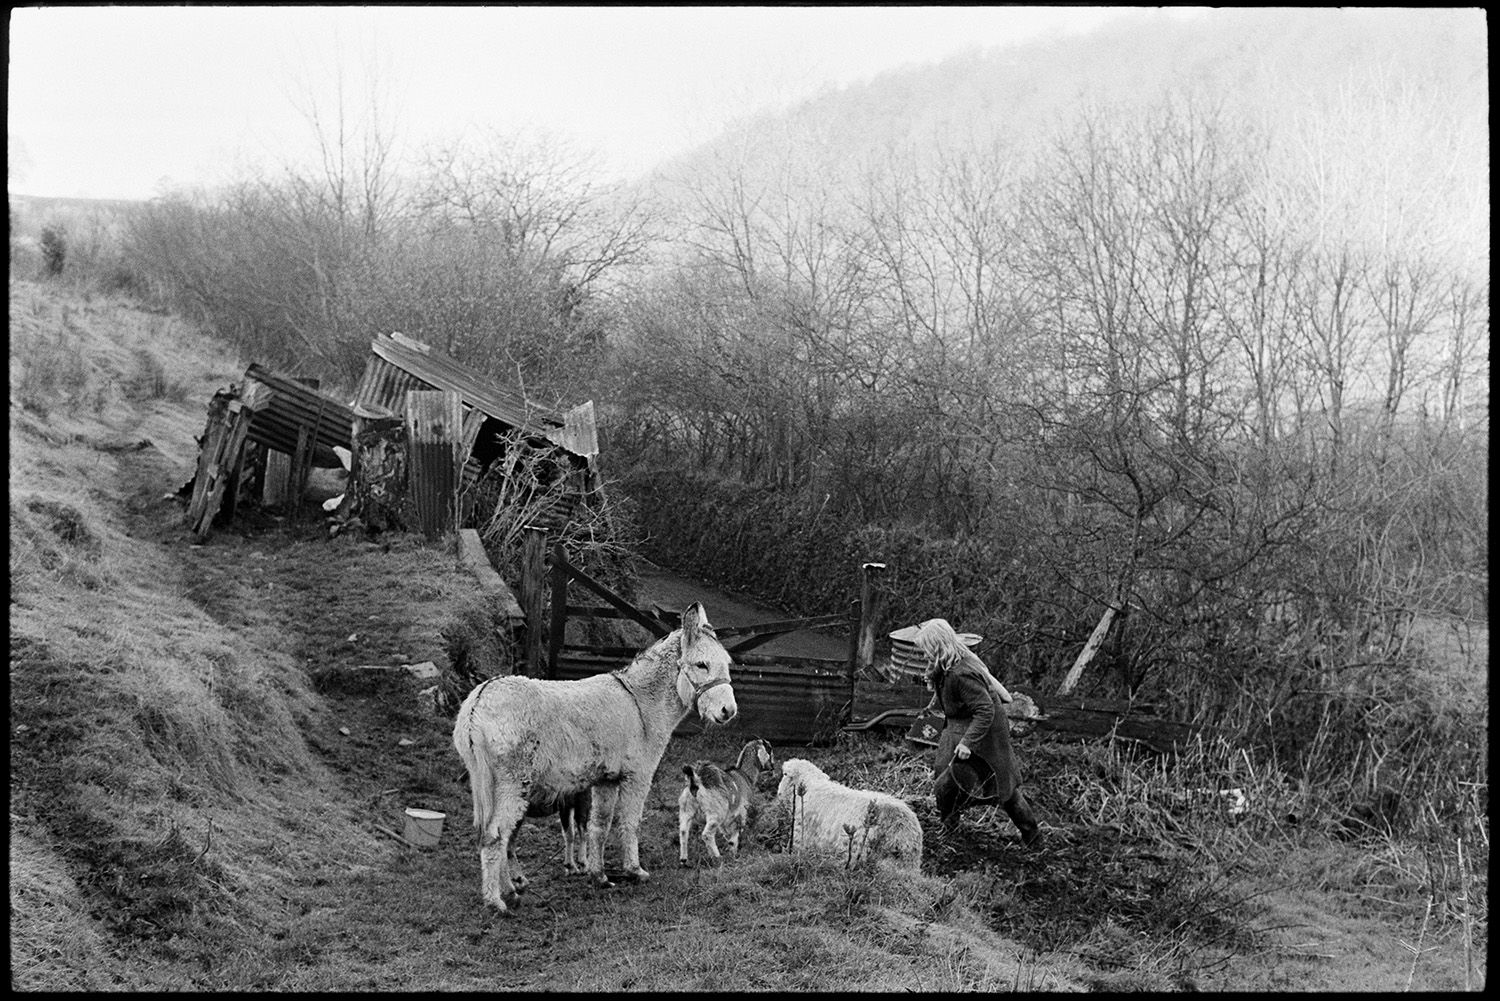 Woman milking goats, early morning frost on trees. 
[Jo Curzon going to milk goats in a field at Millhams, Dolton on a frosty morning. A donkey is also in the field. Corrugated iron sheds and a gate can be seen in the background.]